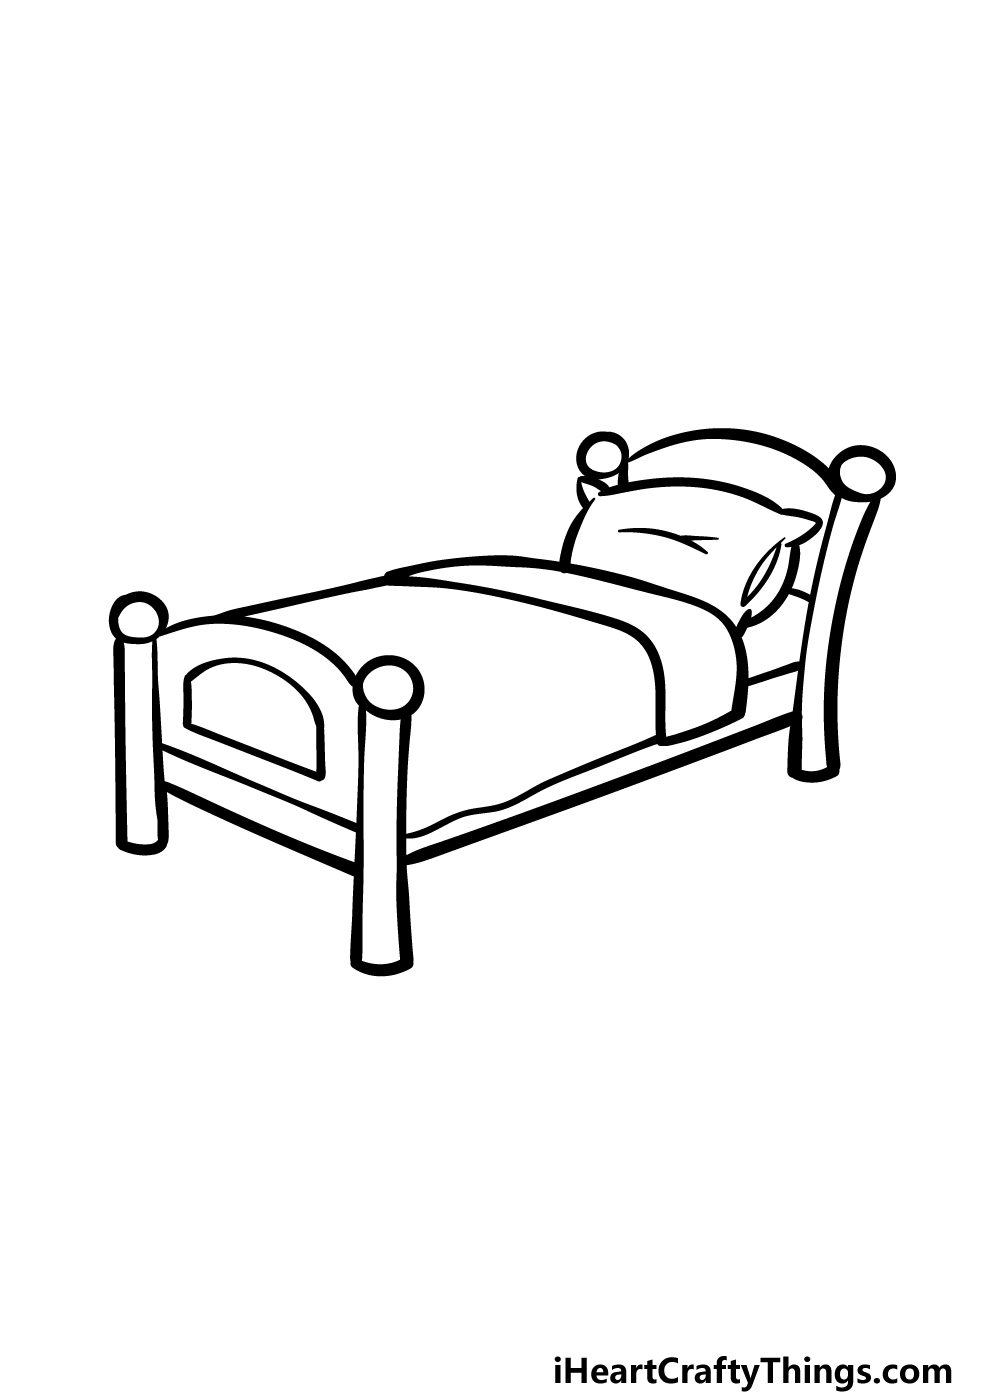 Cartoon Bed Drawing - How To Draw A Cartoon Bed Step By Step